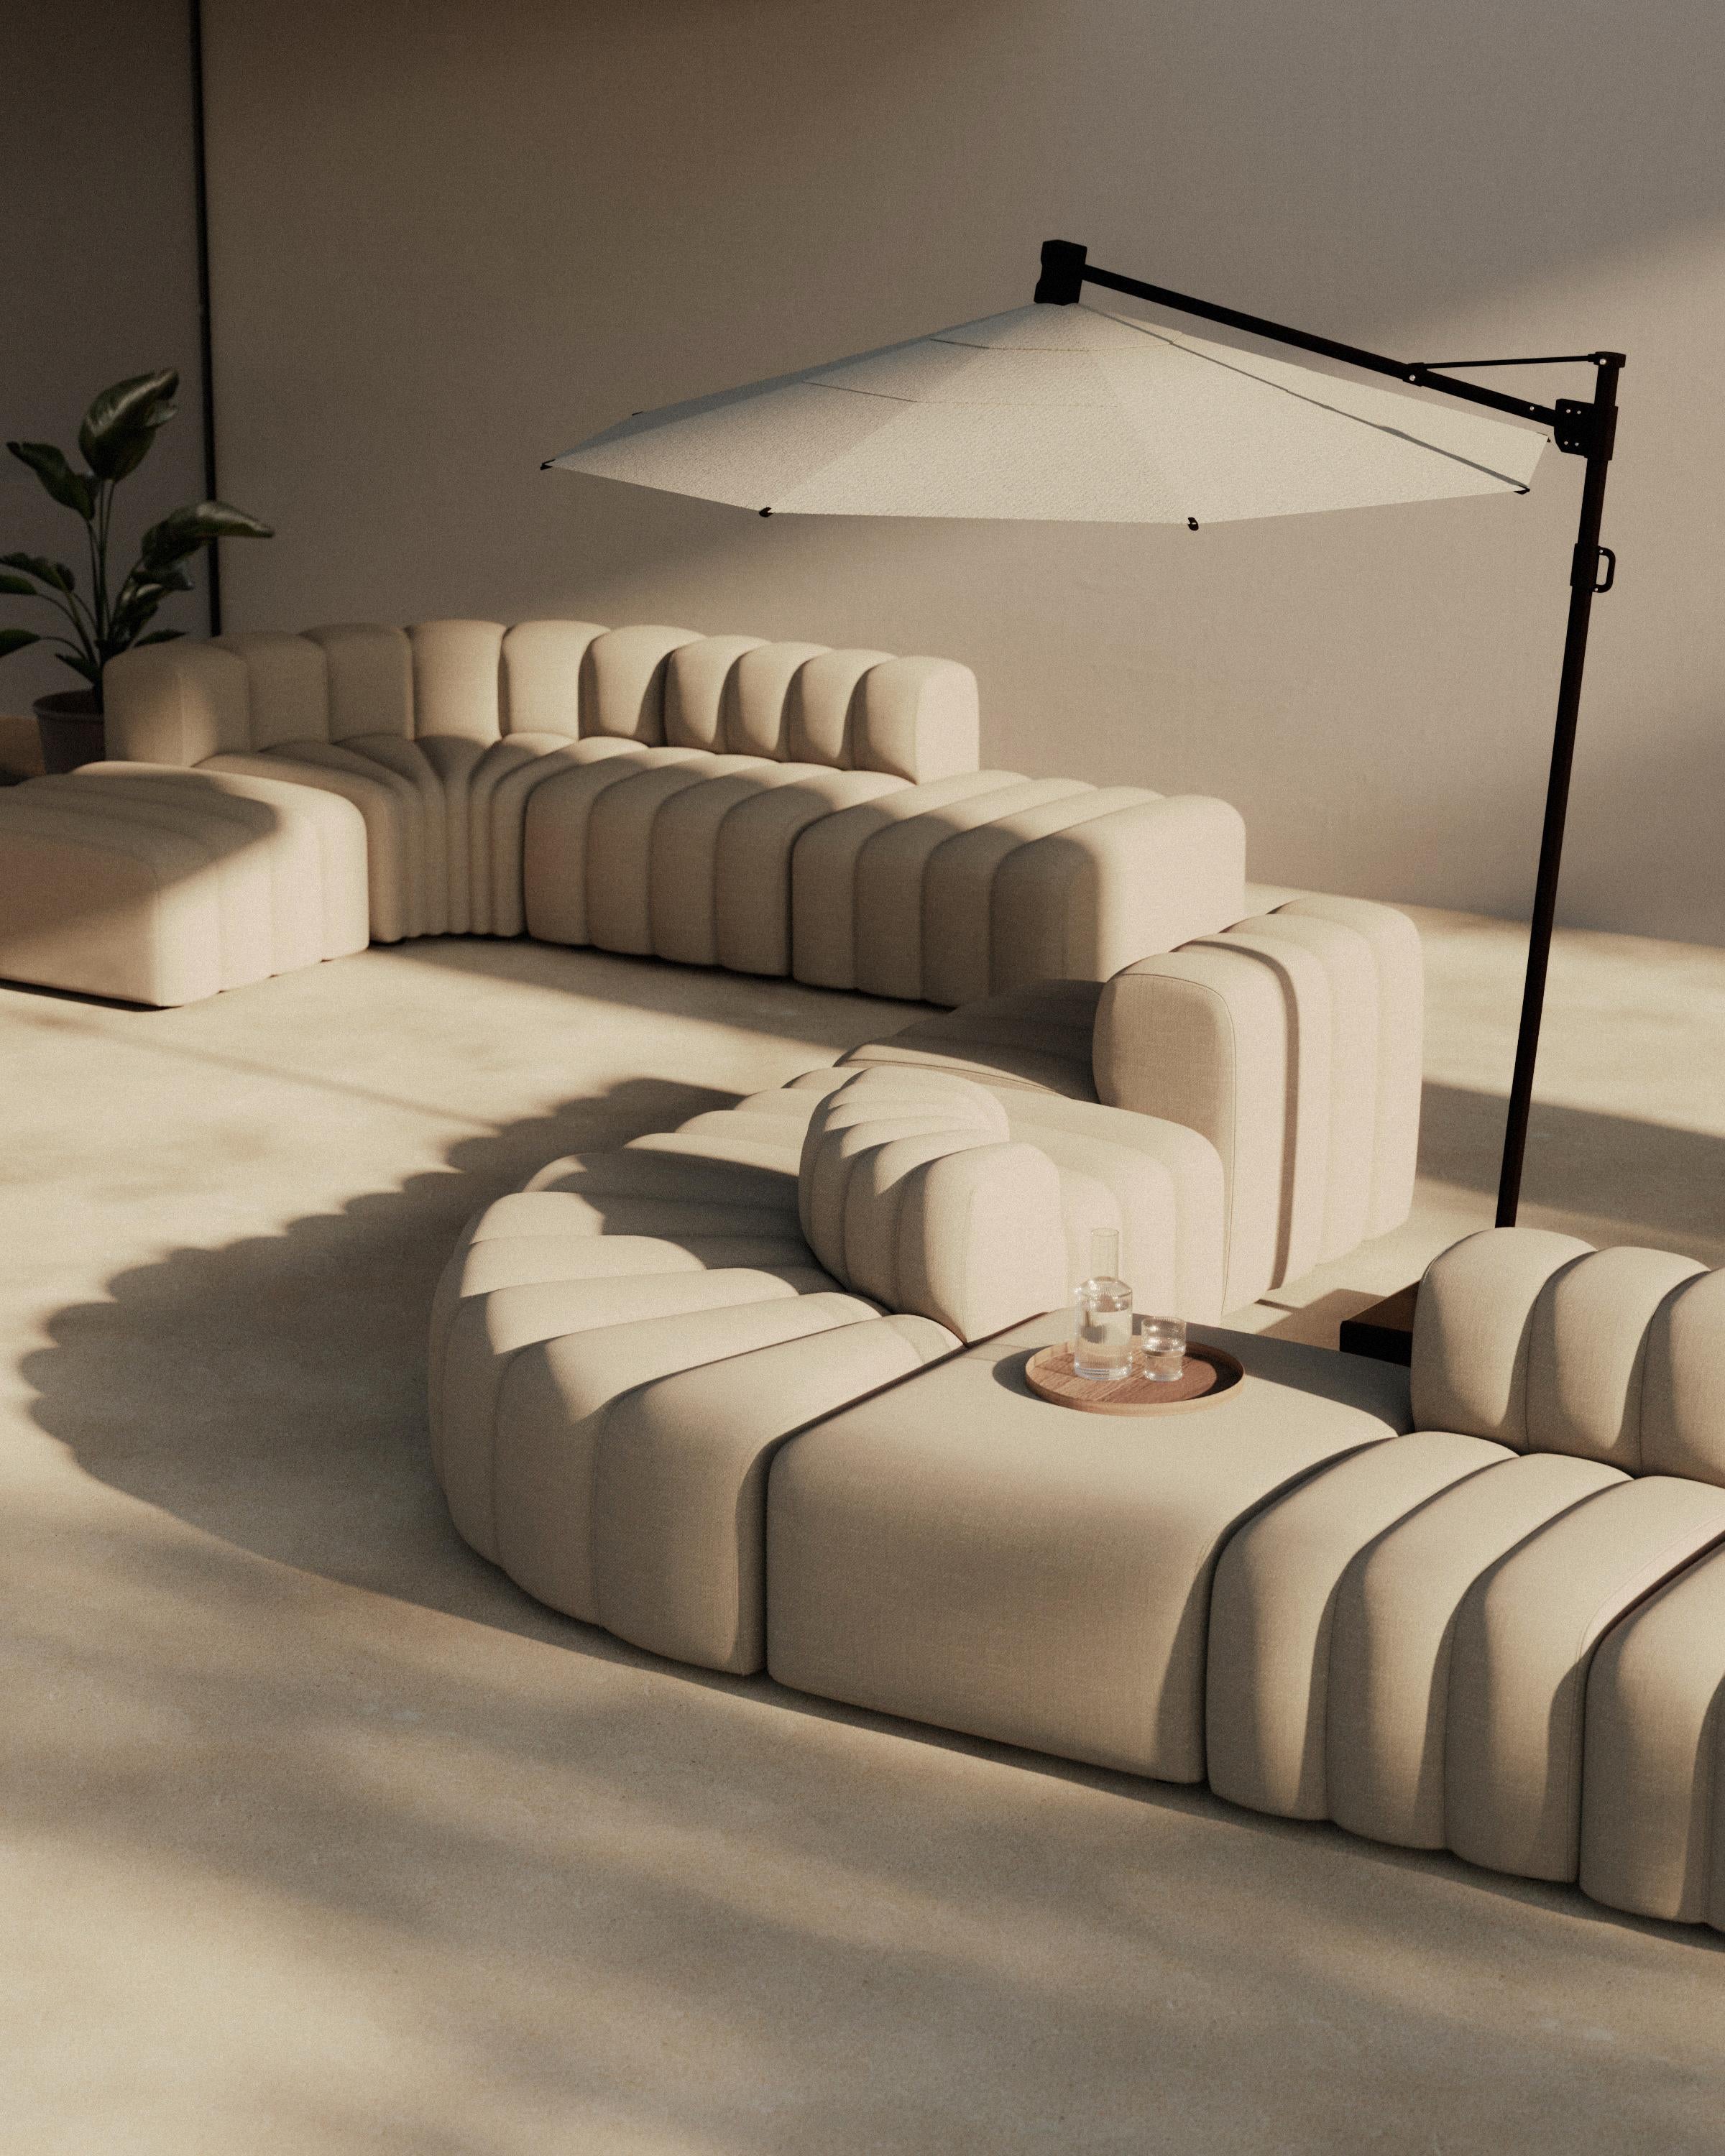 Danish Studio Large Modular Outdoor Sofa by NORR11 For Sale